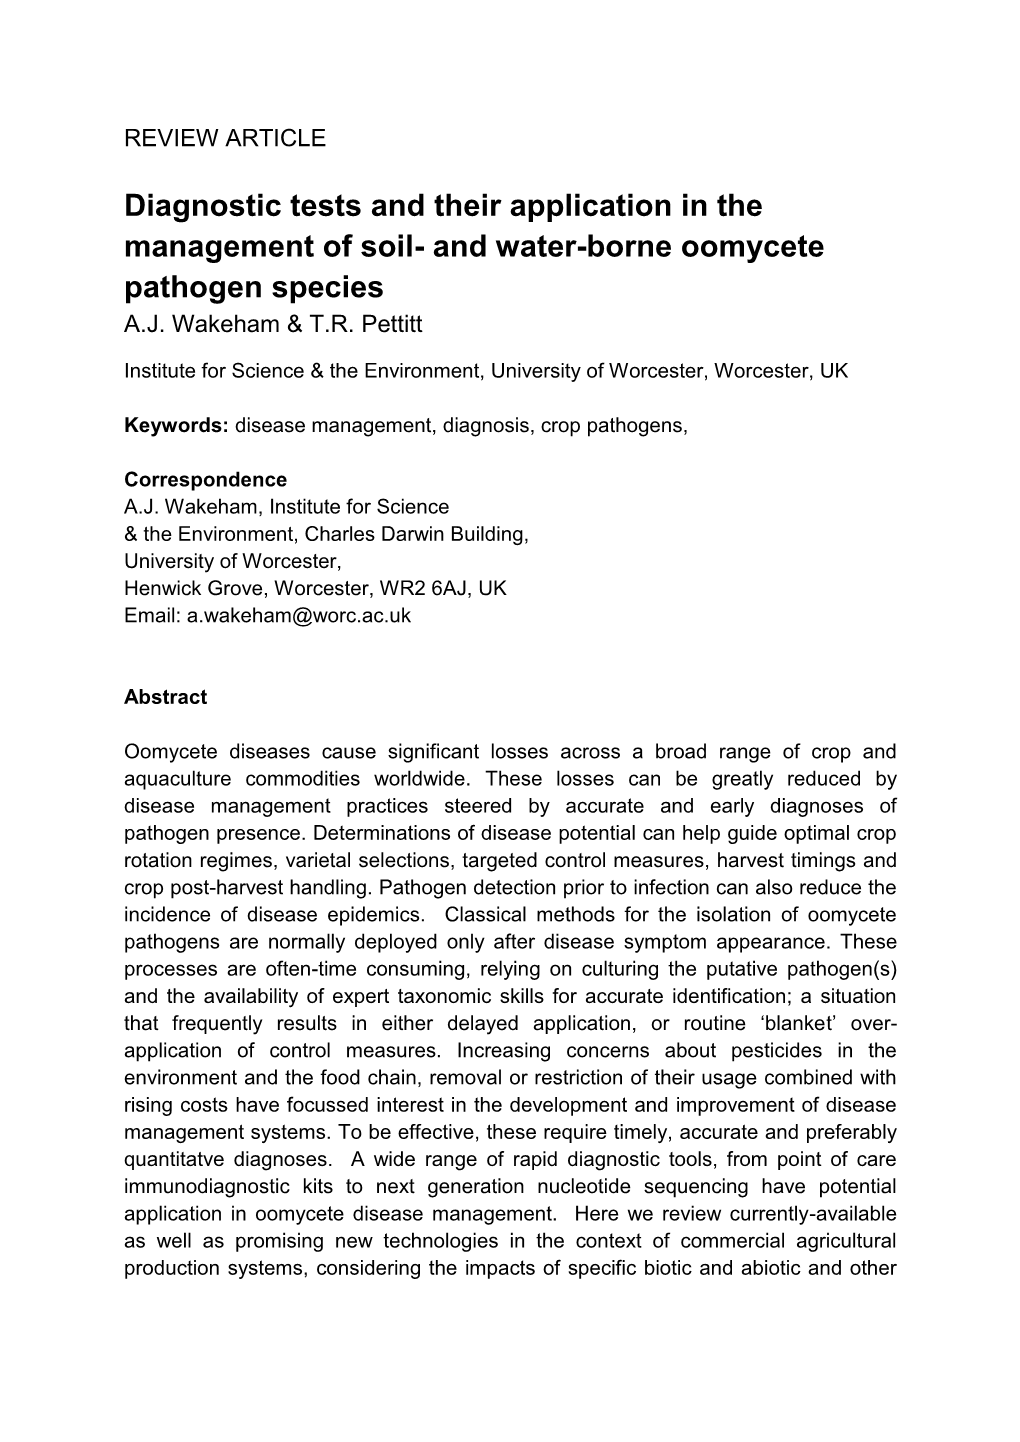 Diagnostic Tests and Their Application in the Management of Soil- and Water-Borne Oomycete Pathogen Species A.J